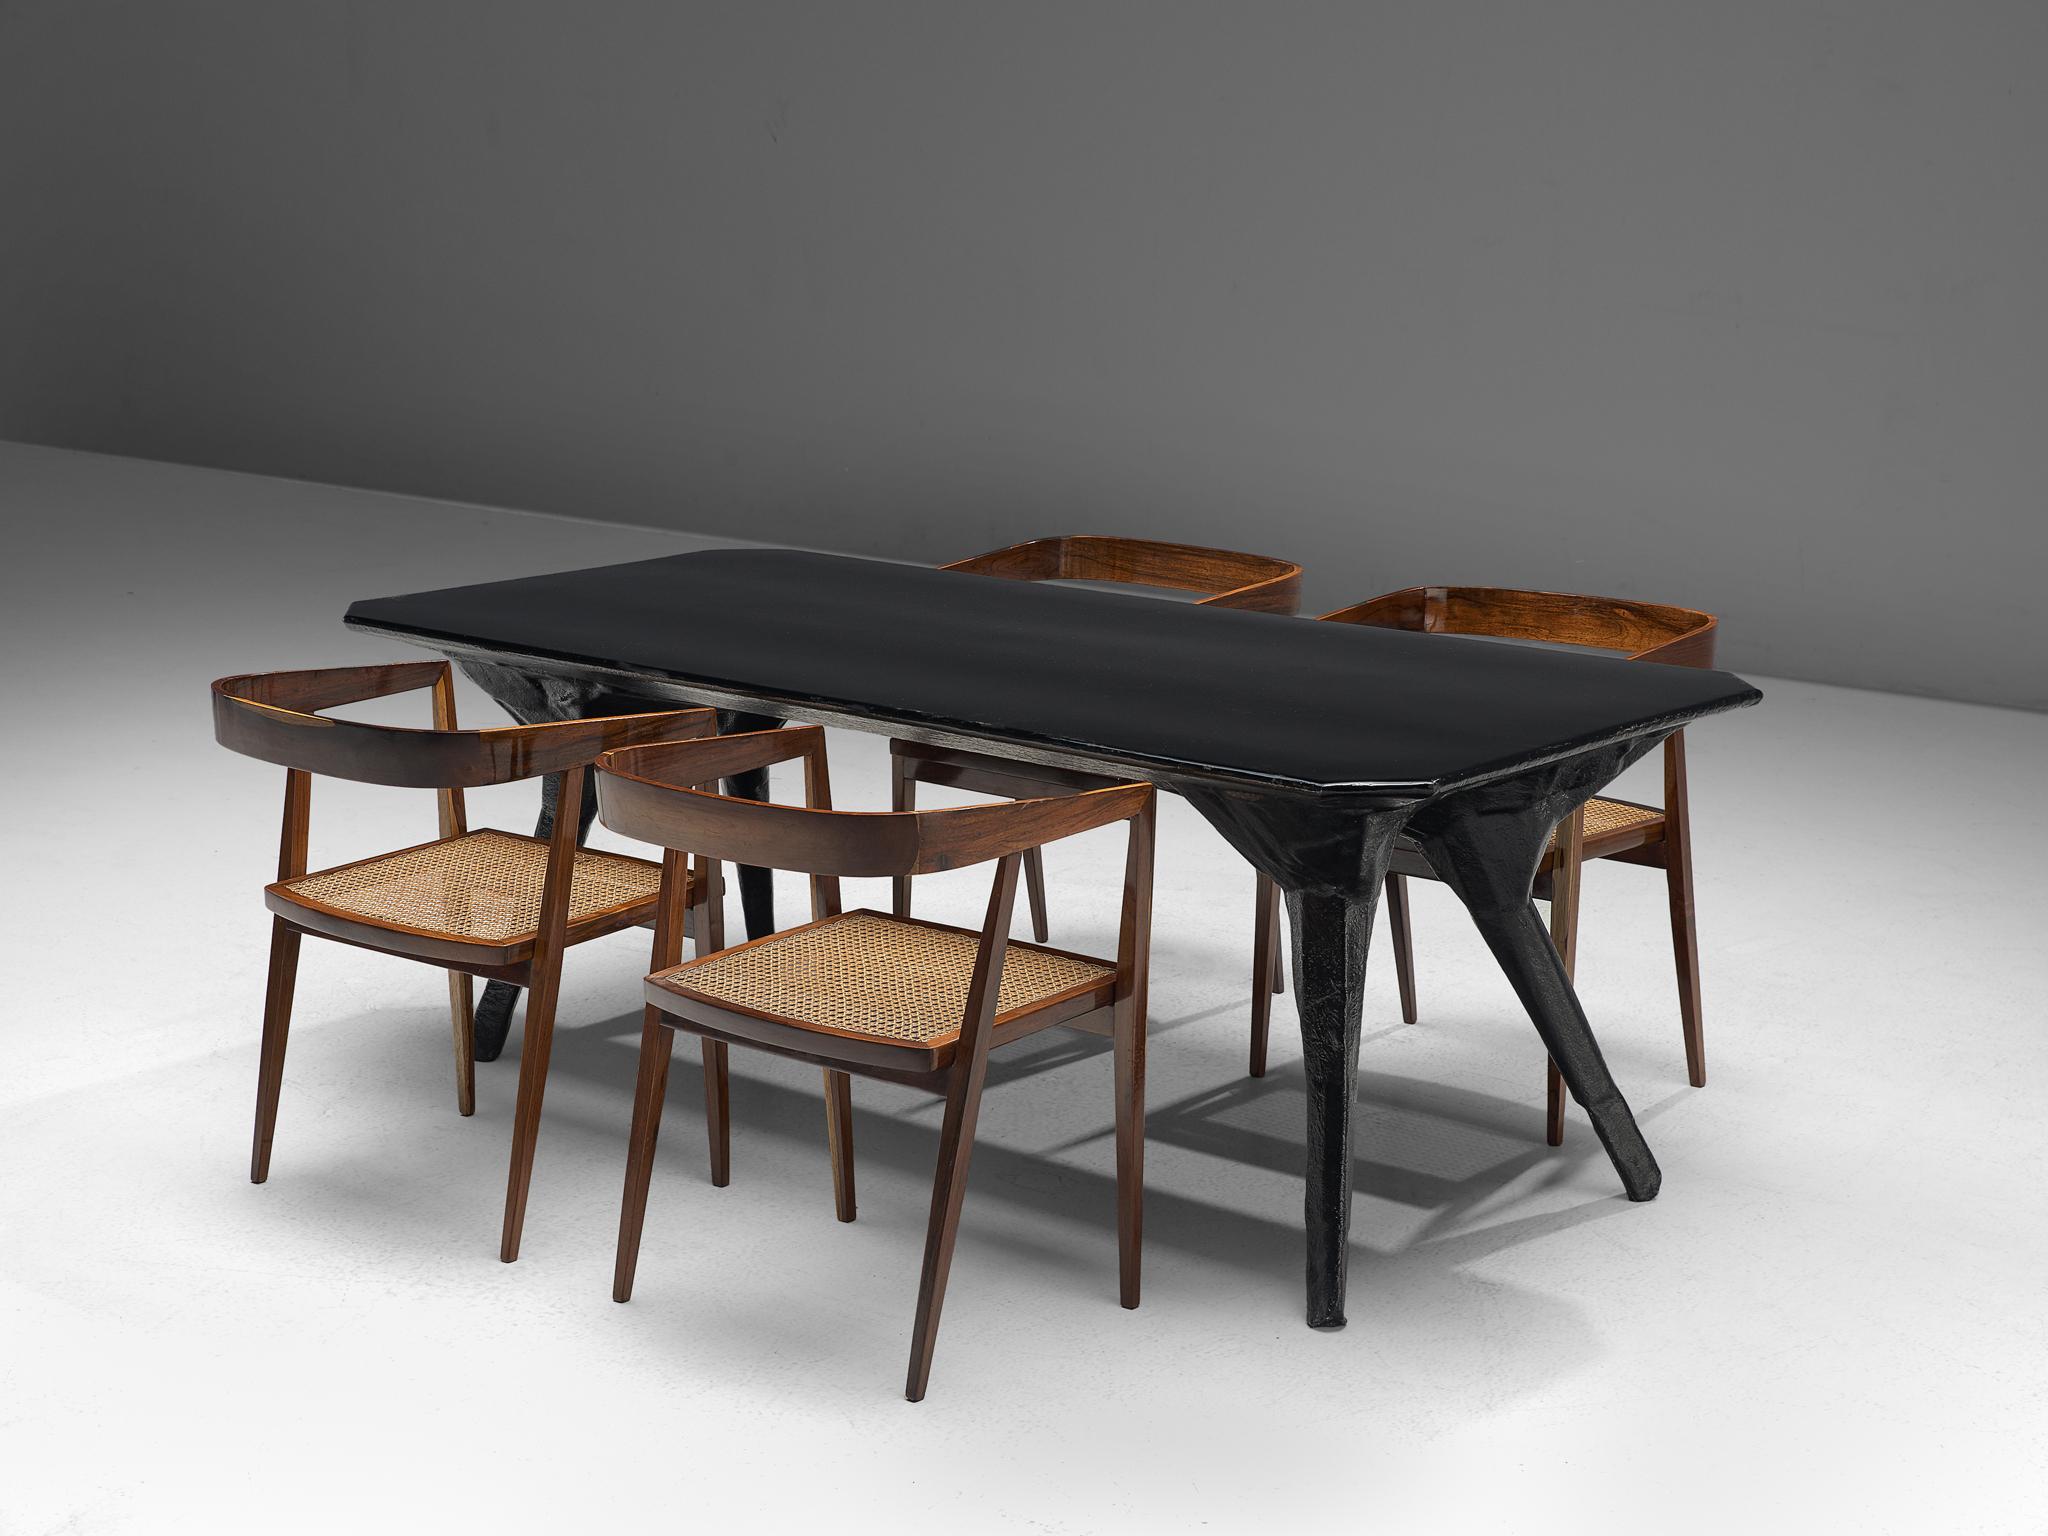 Italian El Ultimo Grito Dining Table with Sculptural Legs